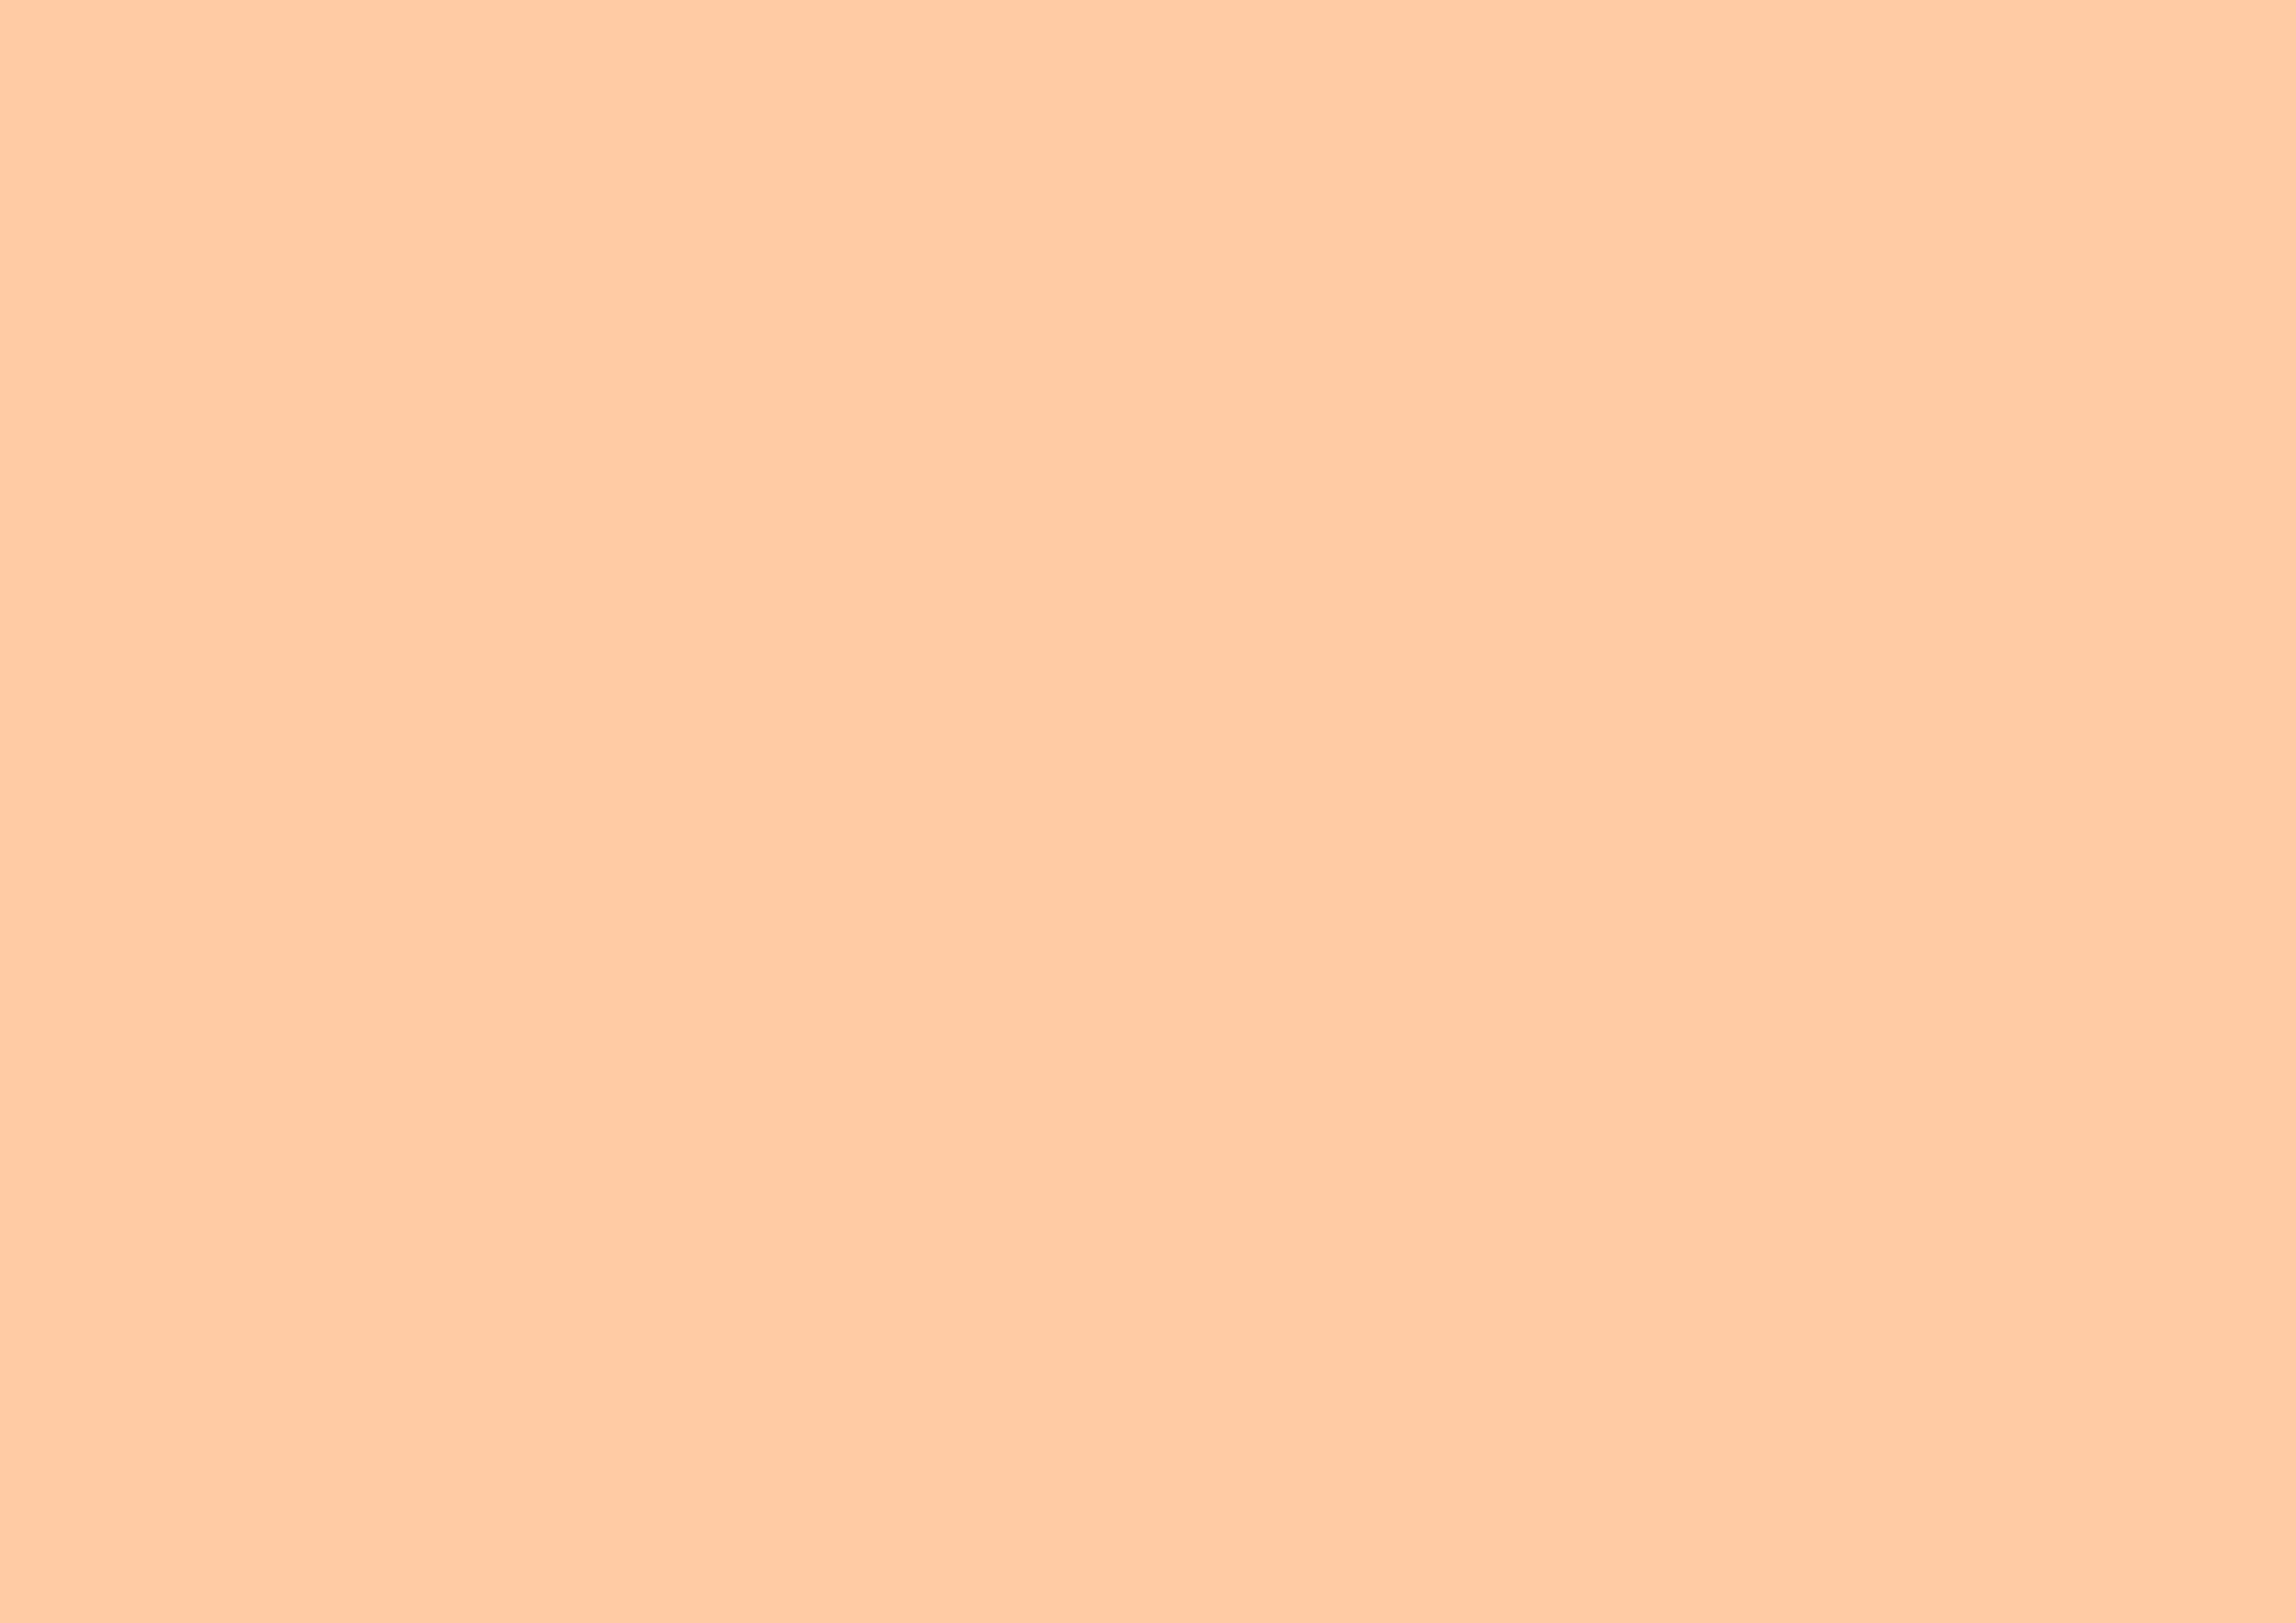 3508x2480 Deep Peach Solid Color Background